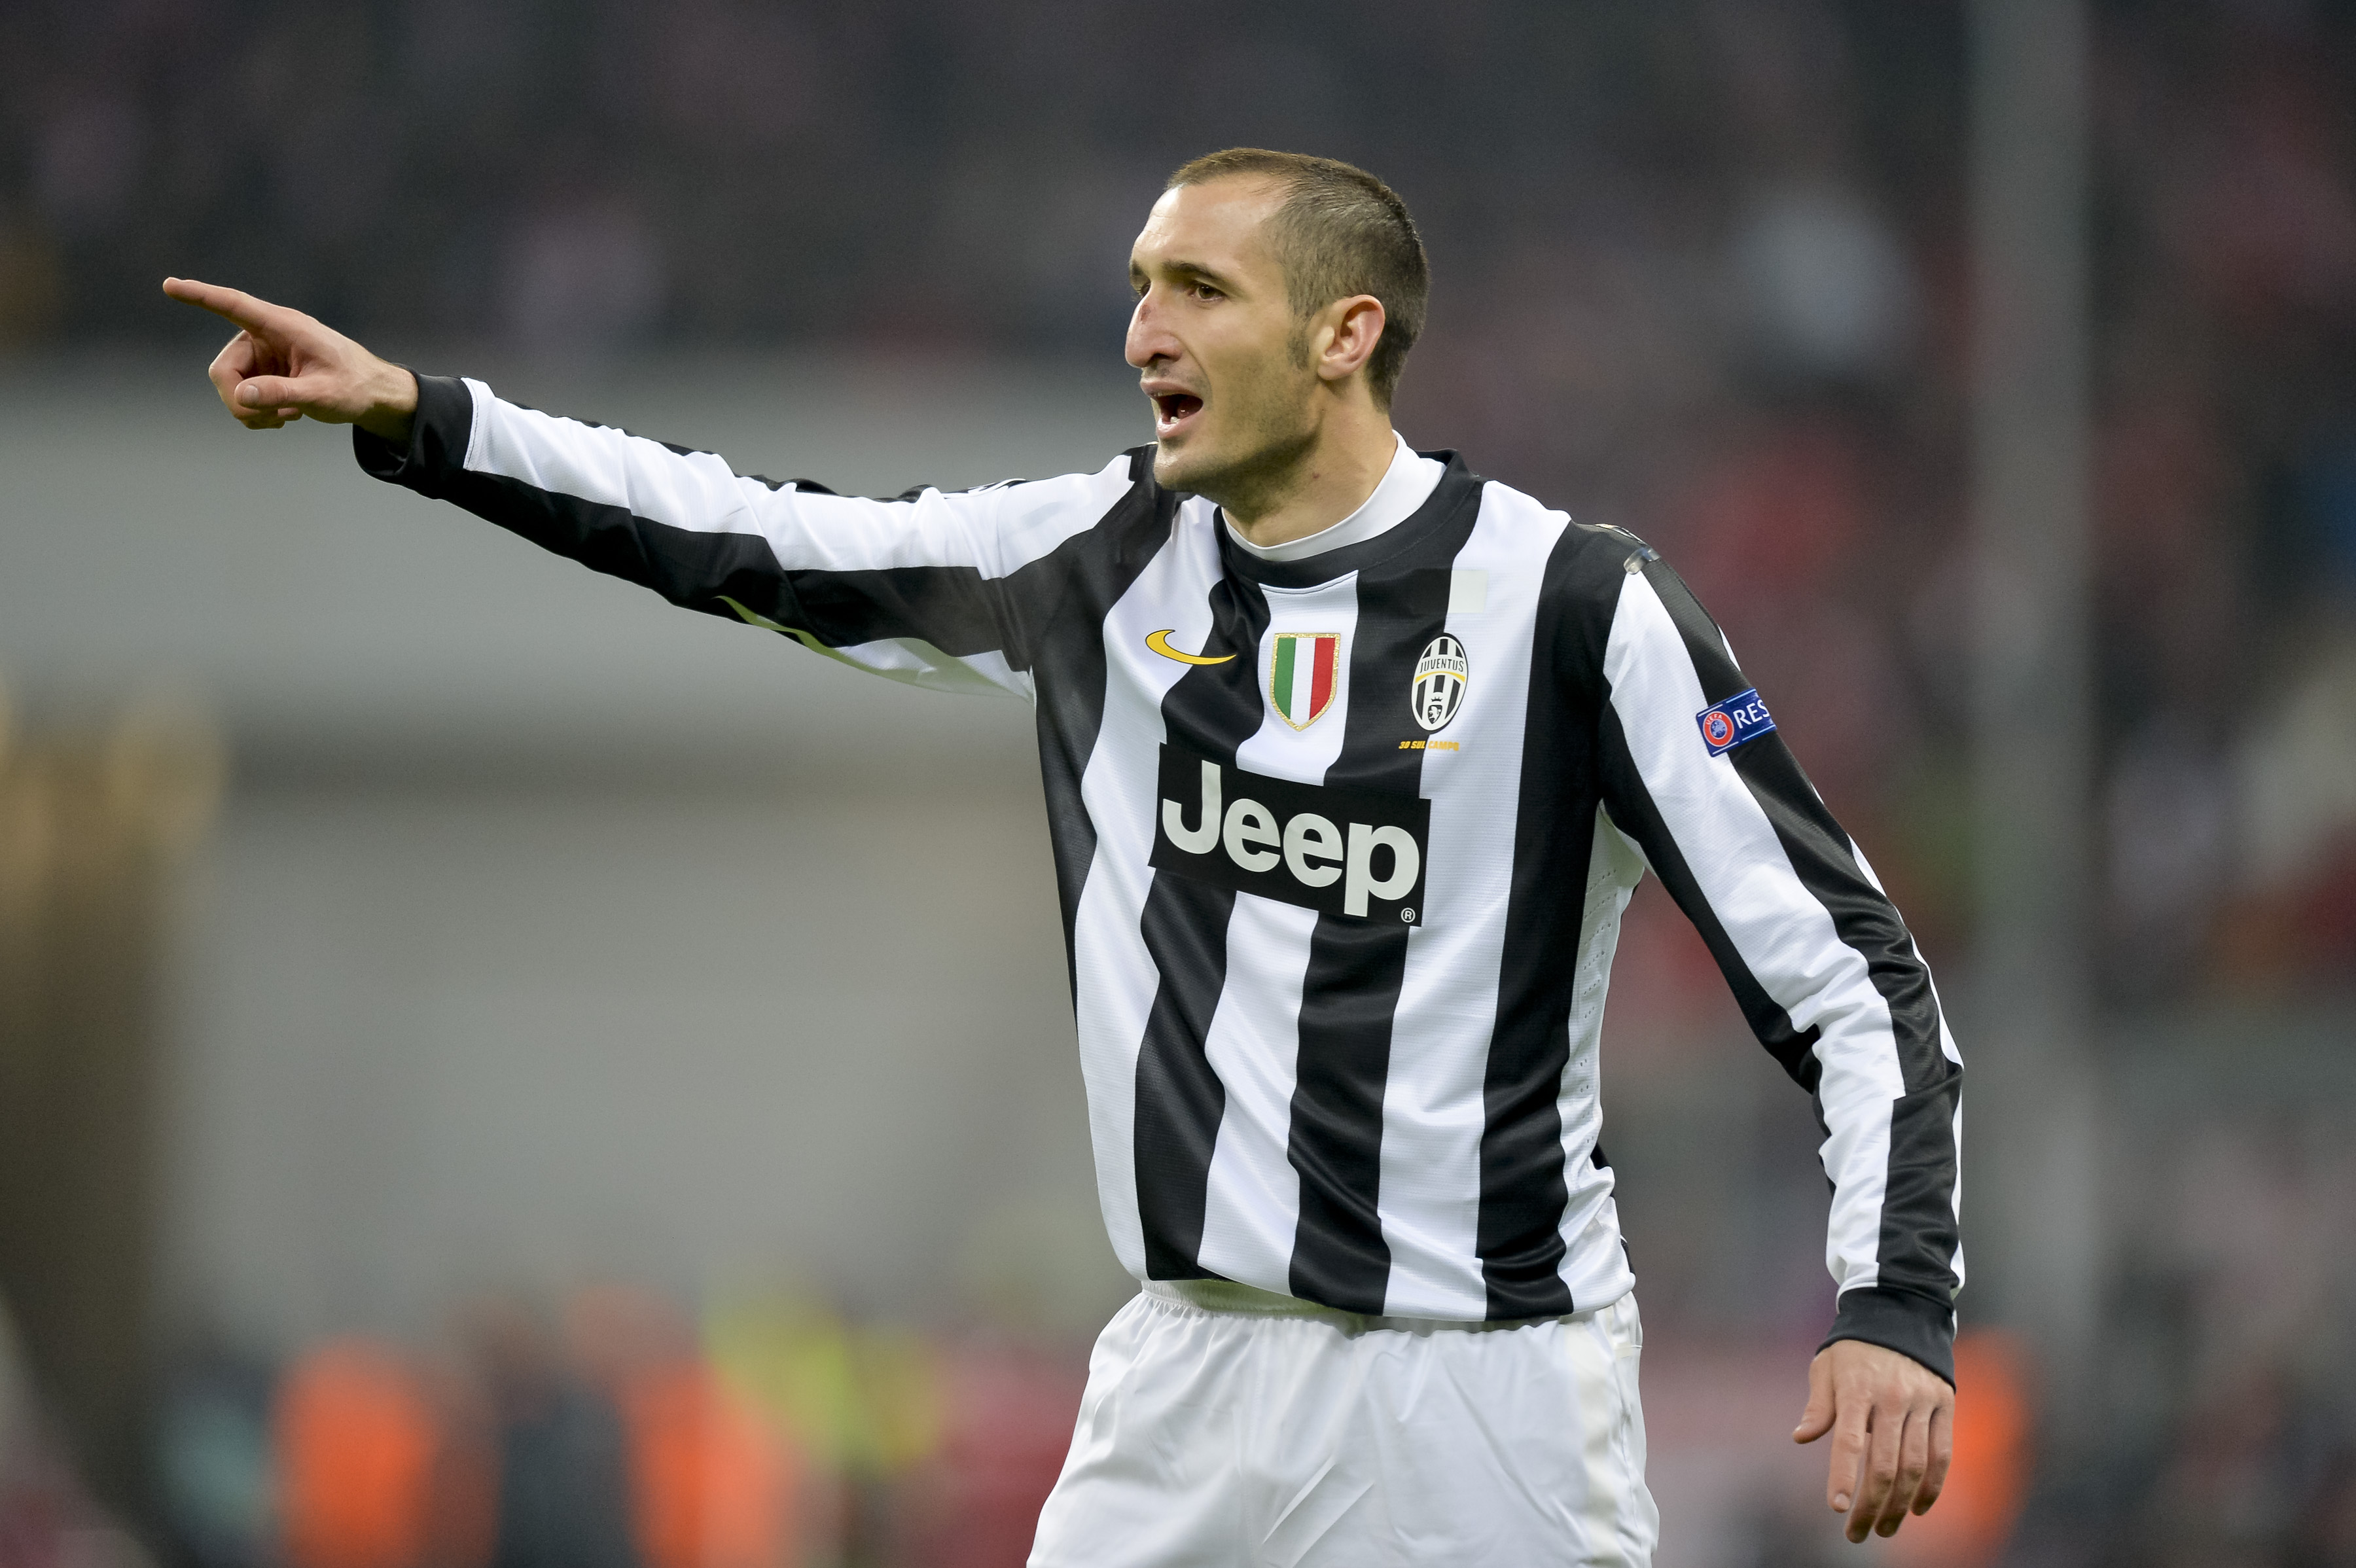 Giorgio Chiellini in action for Juventus against Bayern Munich in the Champions League in April 2013.